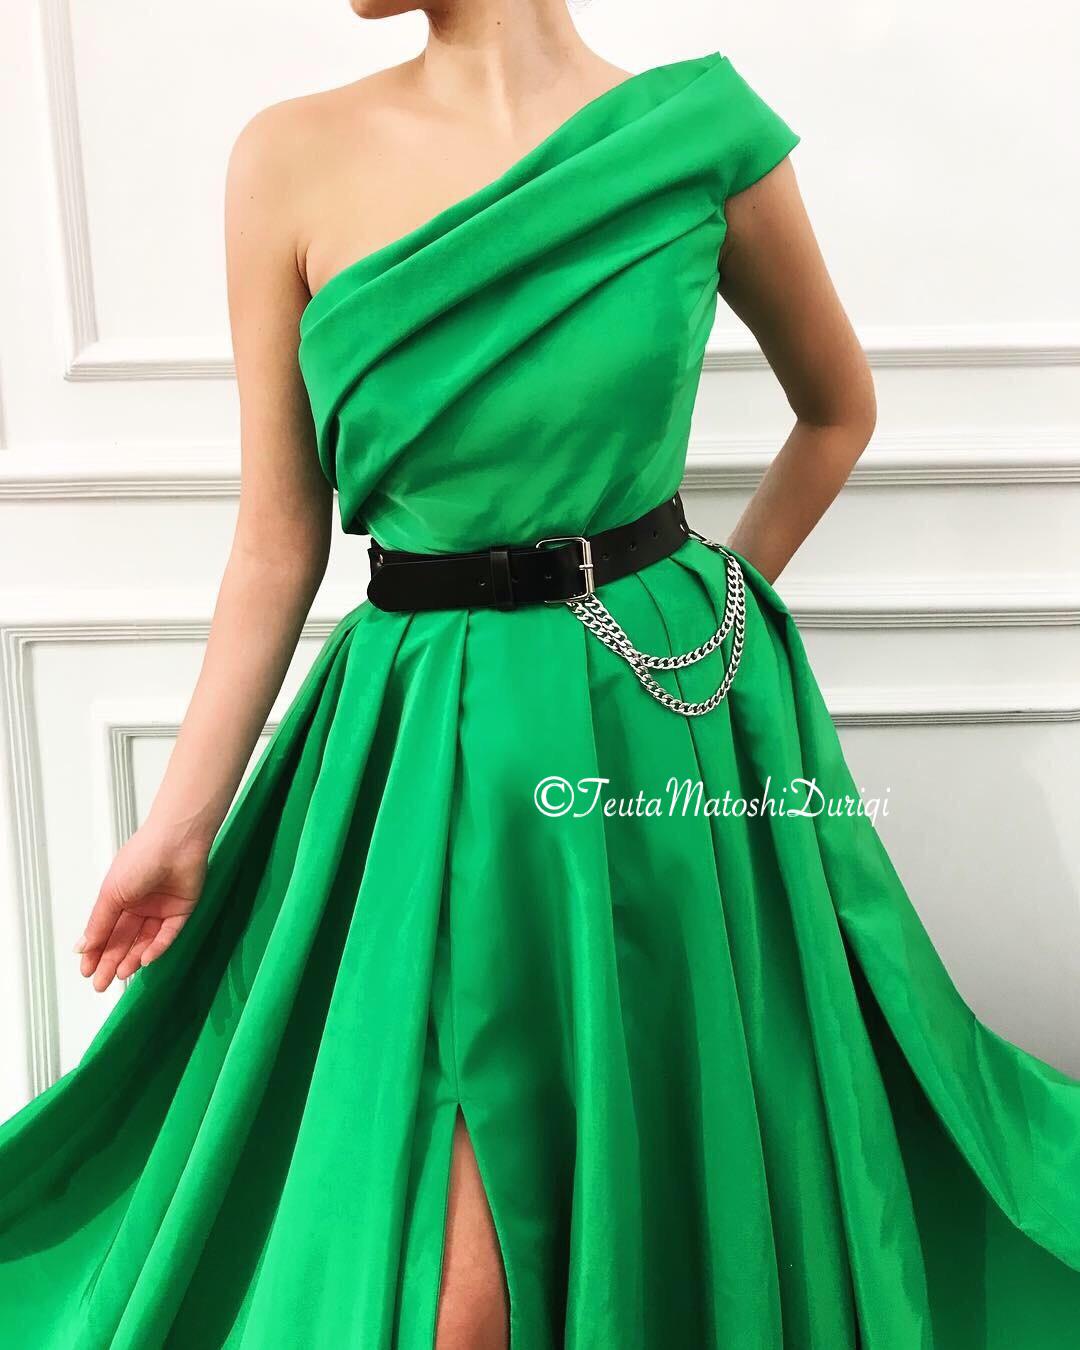 Green A-Line dress with belt and one shoulder sleeve